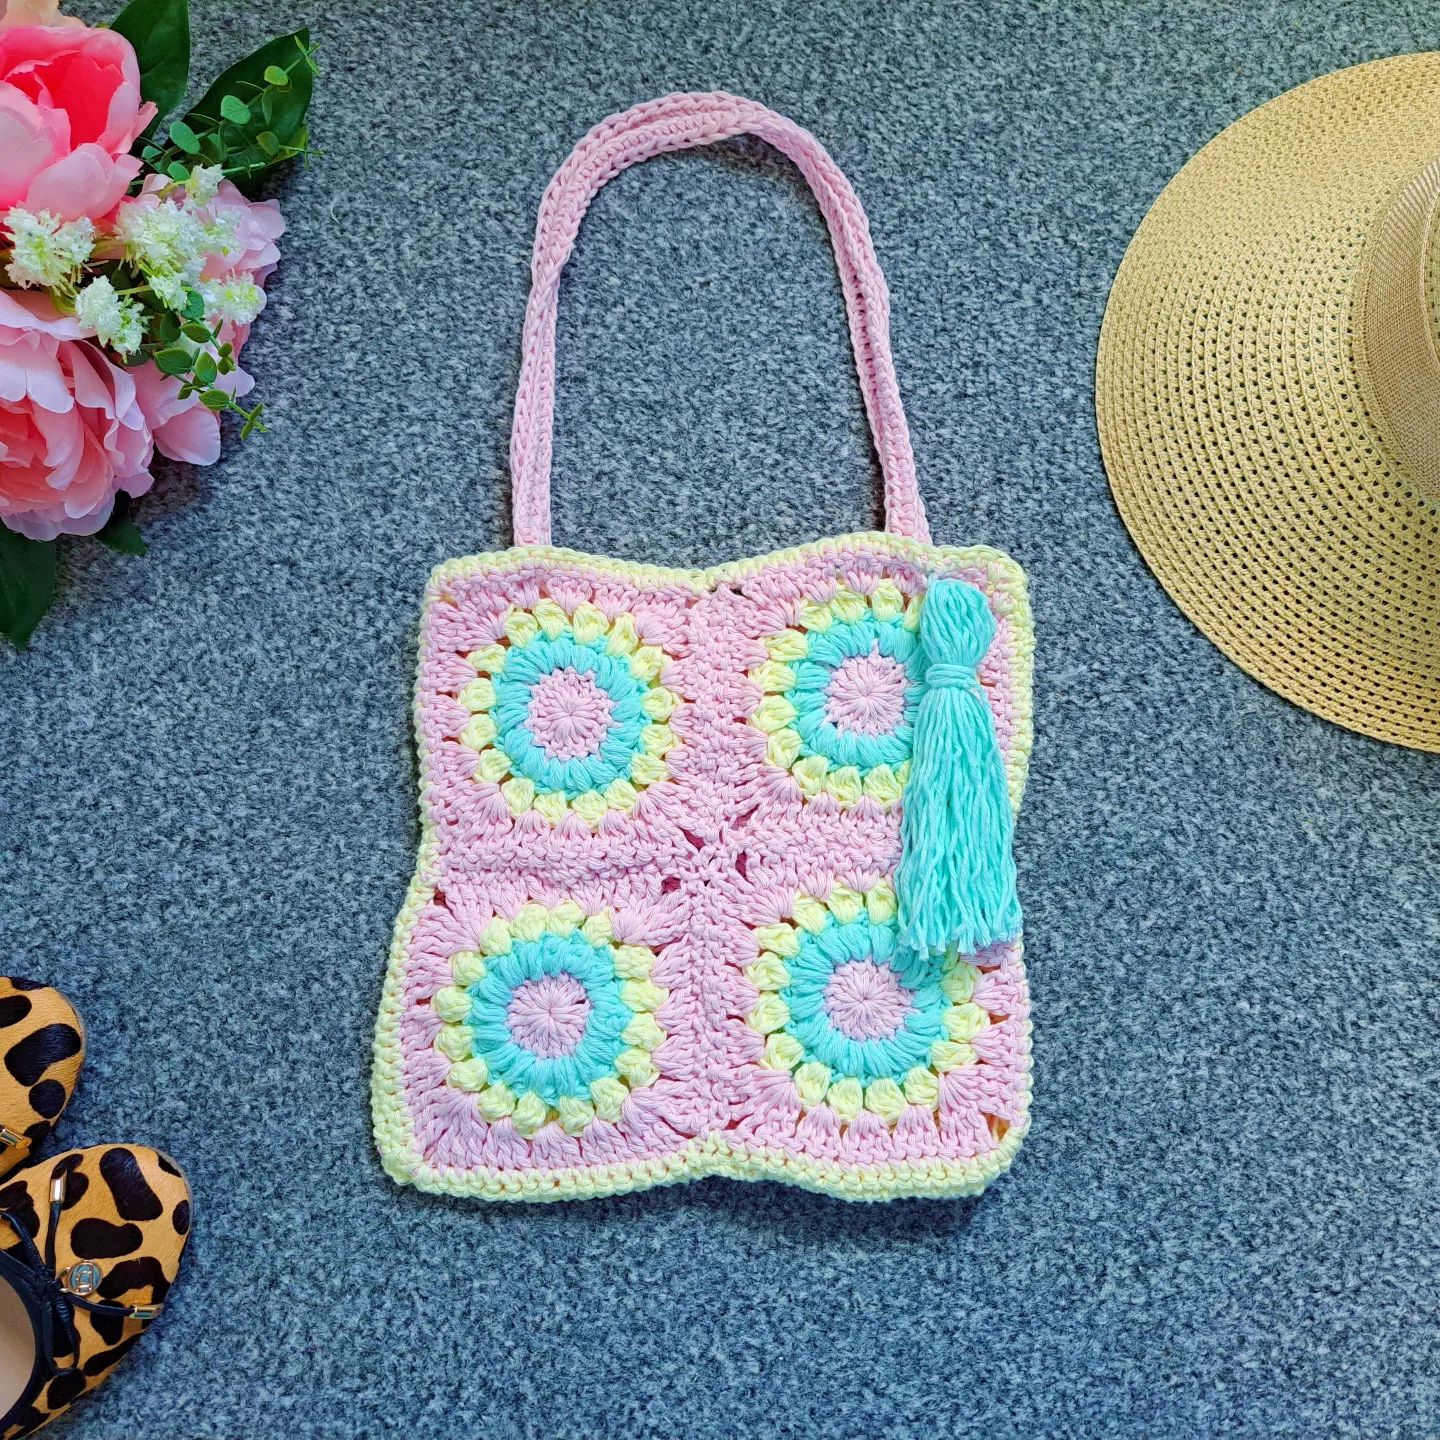 My new crochet tutorial is now live 💞 for this beautiful Boho Sunburst Granny Bag 🌸🌼🦋
I absolutely love Sunburst Granny Squares, and am now designing a cardigan with Sunburst Granny Squares 🌼
This crochet project is crocheted with @paintboxyarns Cotton Aran yarn

#crochet #crochetinspiration #hookedonhandmade #crochetgram #crochetersofinstagram #crochetpattern #crochetaddict #crochetersofinstagram #instacrochet #crochetaddict #crochetpattern #crocheter #igcrochet #crochetlover #crochetyoutuber #crochetpassion #instacrochet #crochettutorial #diy #minutescraft #hookedoncrochet #crochetyoutuber